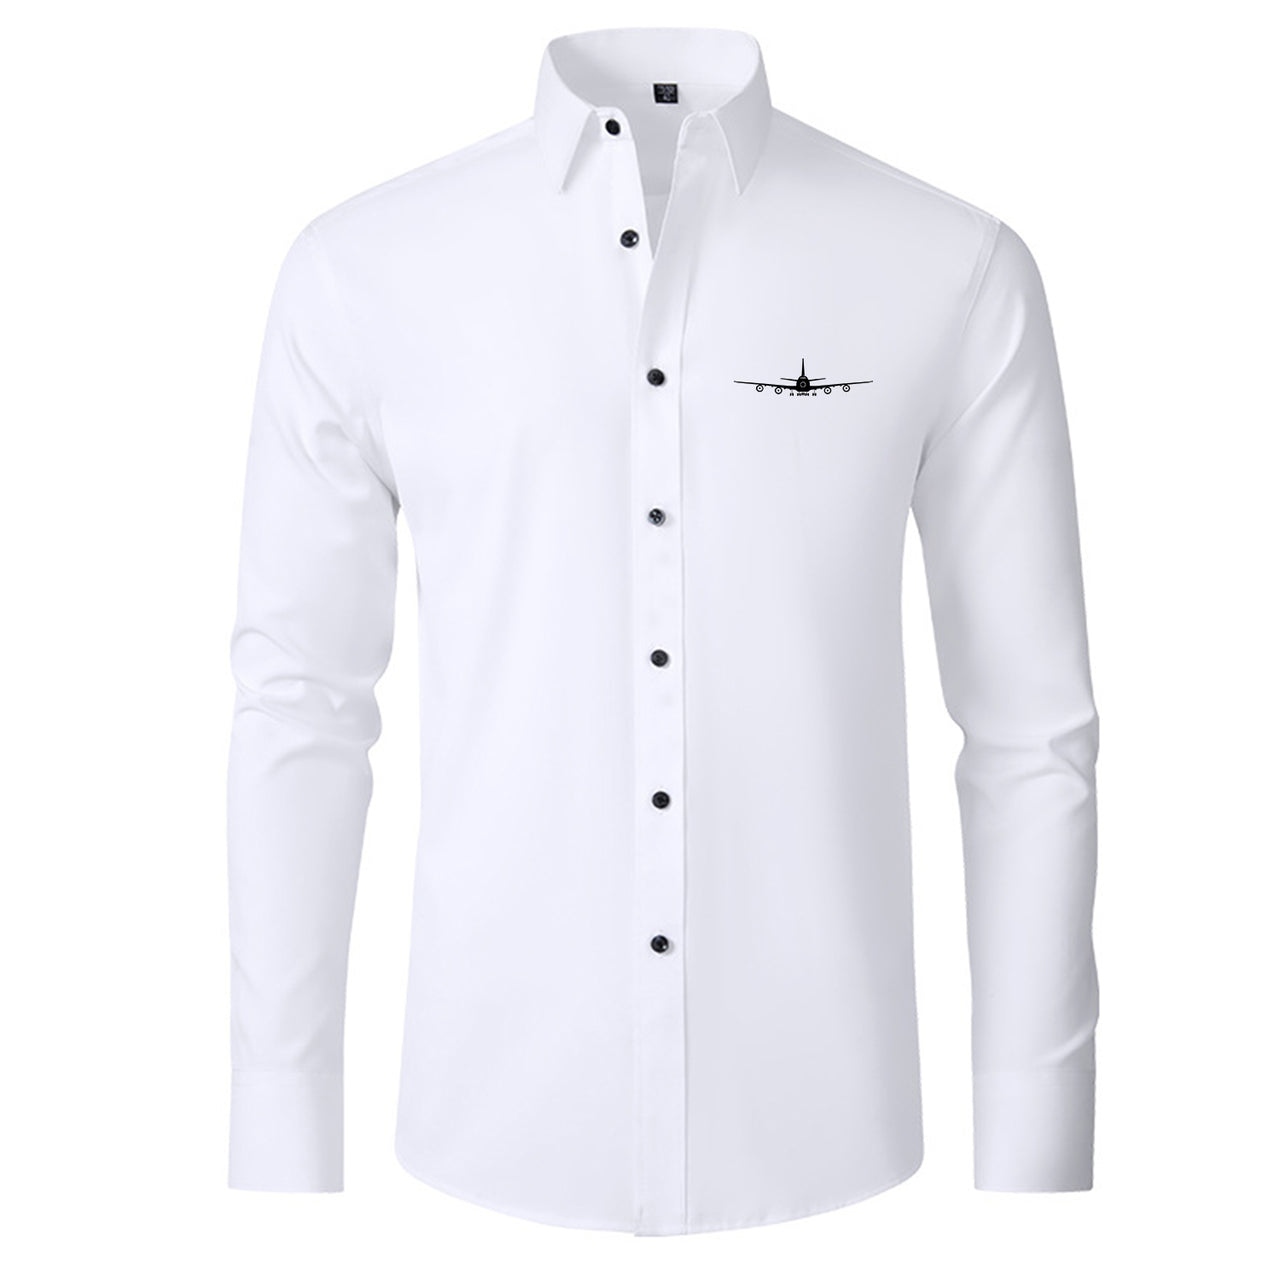 Boeing 747 Silhouette Designed Long Sleeve Shirts